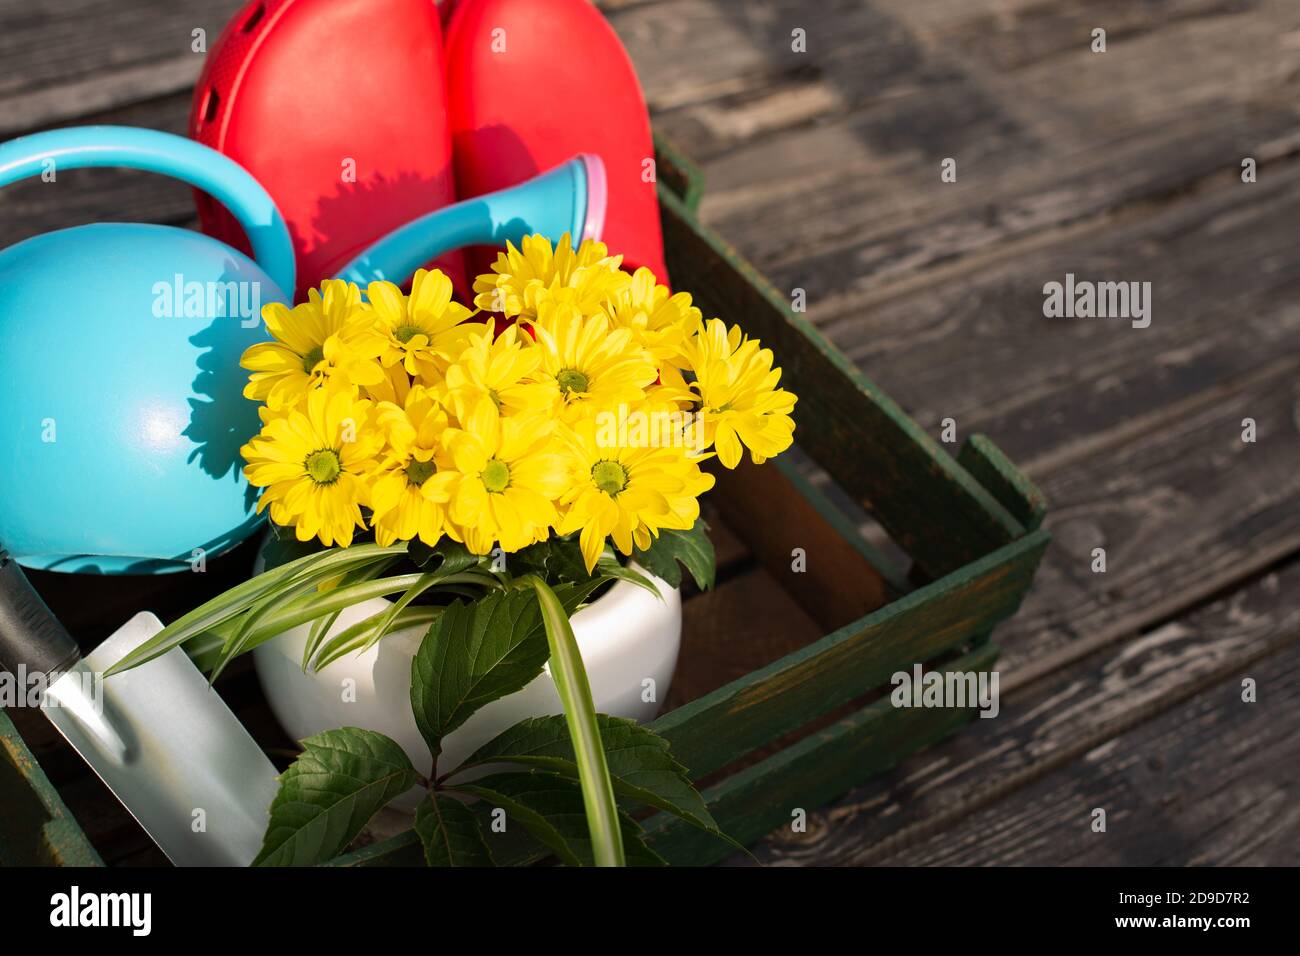 Gardening. work in the garden. tools, watering can and flower in a pot on a background of green leaves. Copy space. Stock Photo